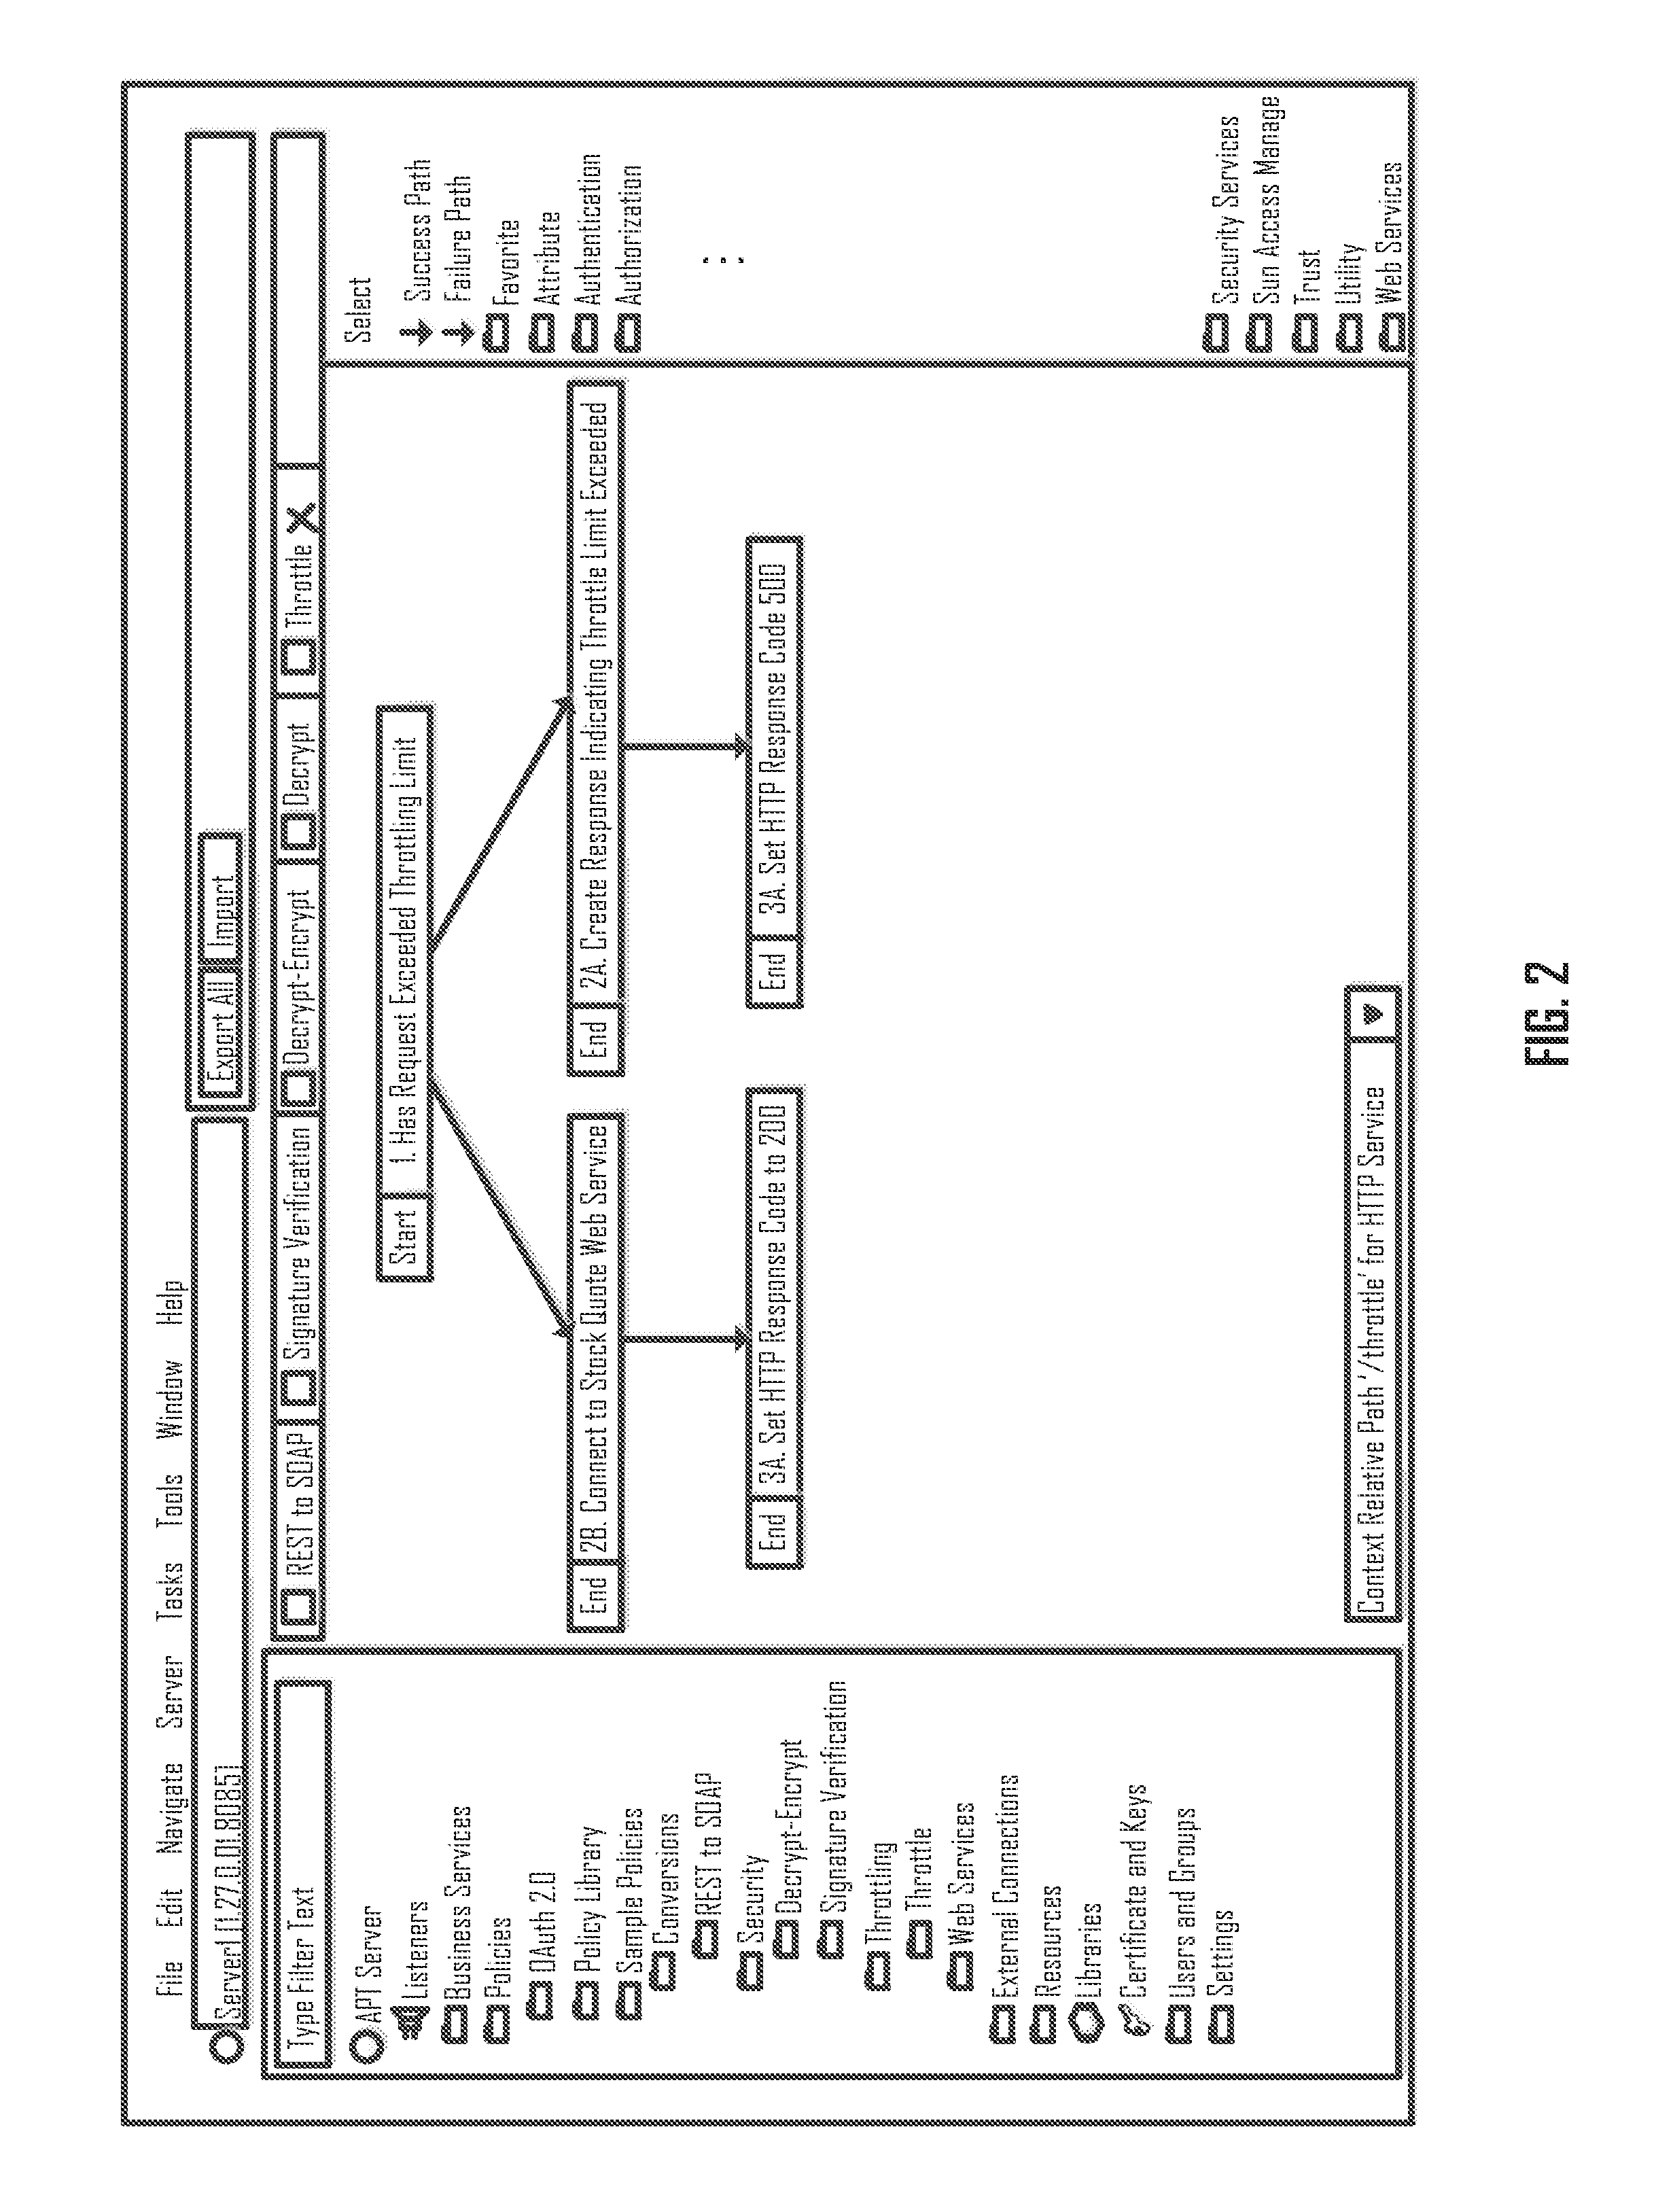 Environmentalization technique for promotion of application programming interface (API) server in lifecycle succession of deployments